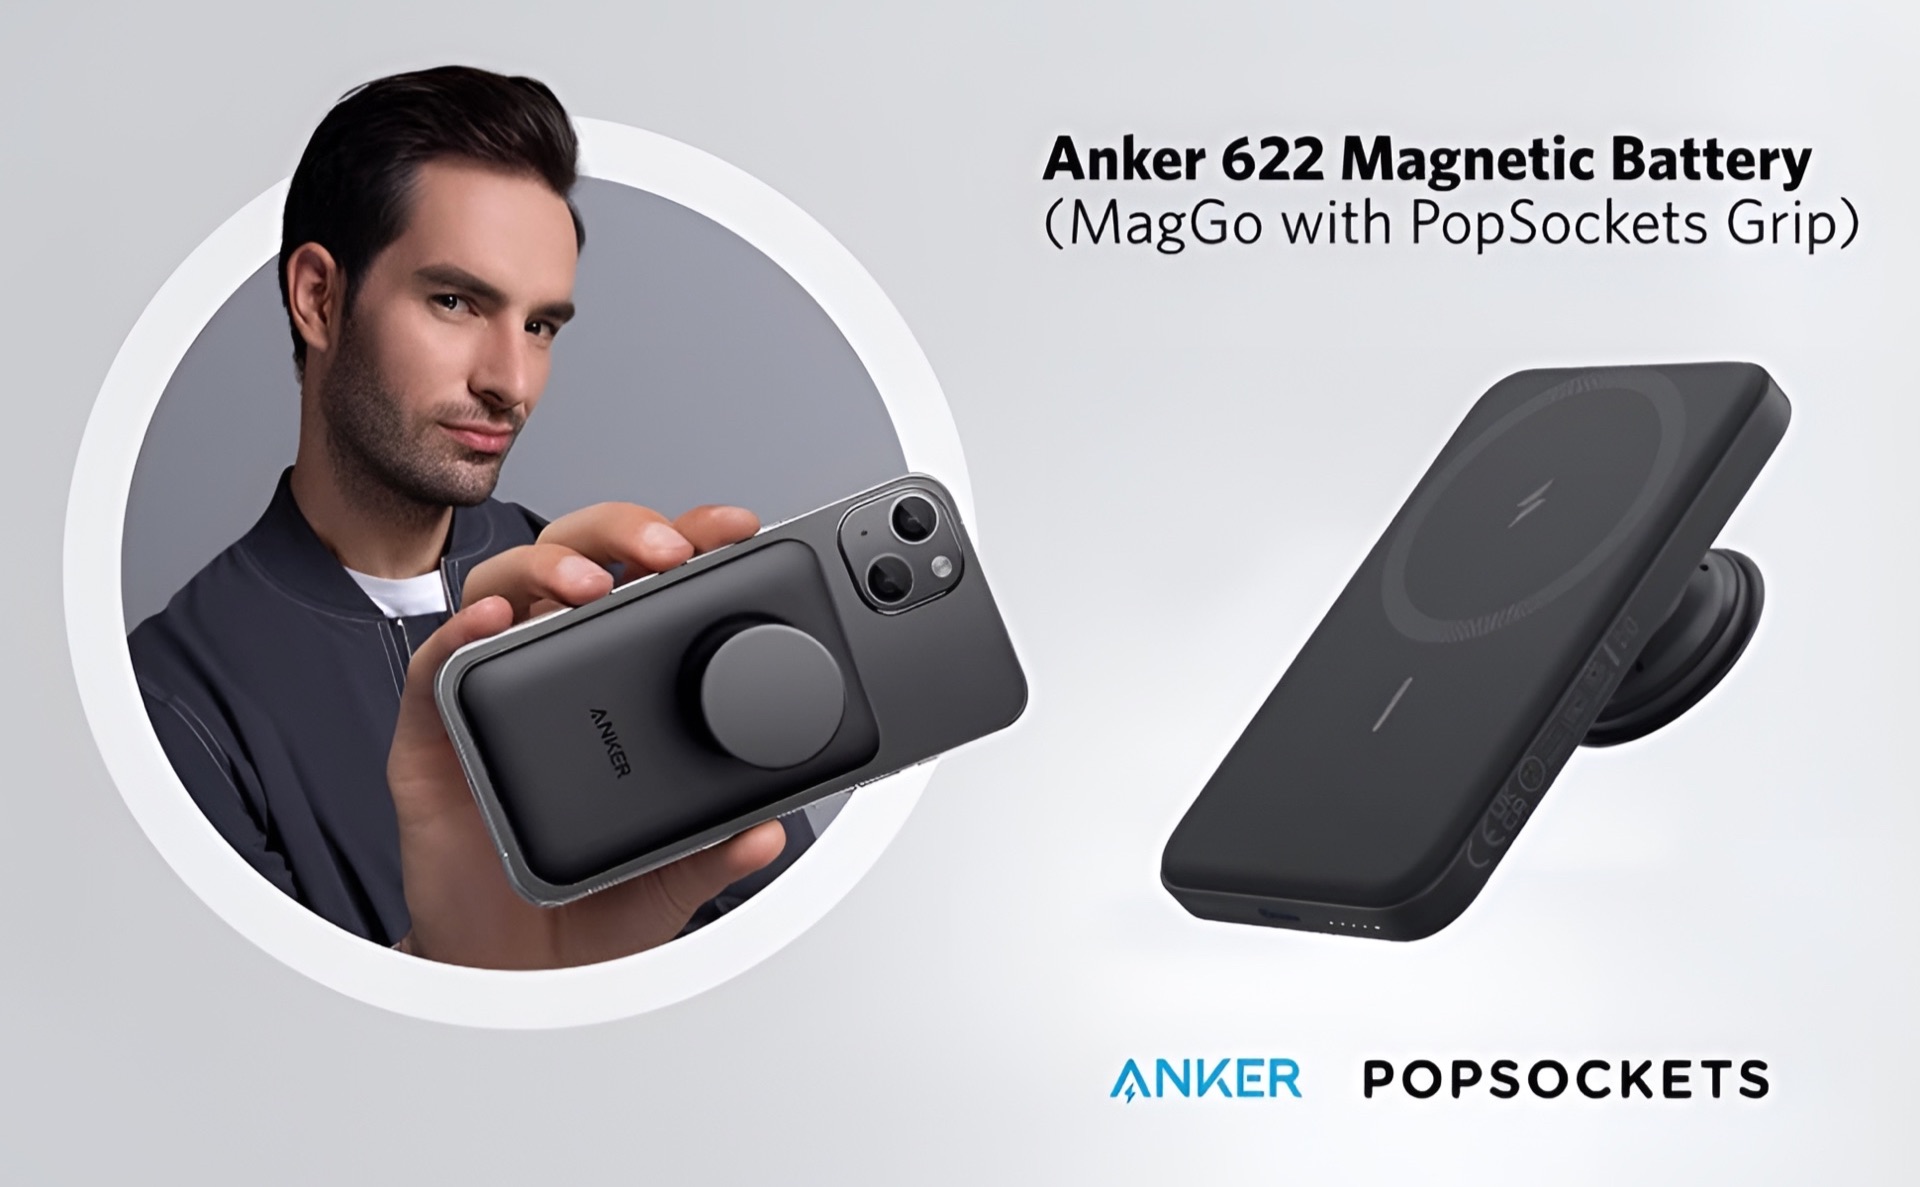 Anker Japan 622 Magnetic Battery MagGo with PopSockets Grip